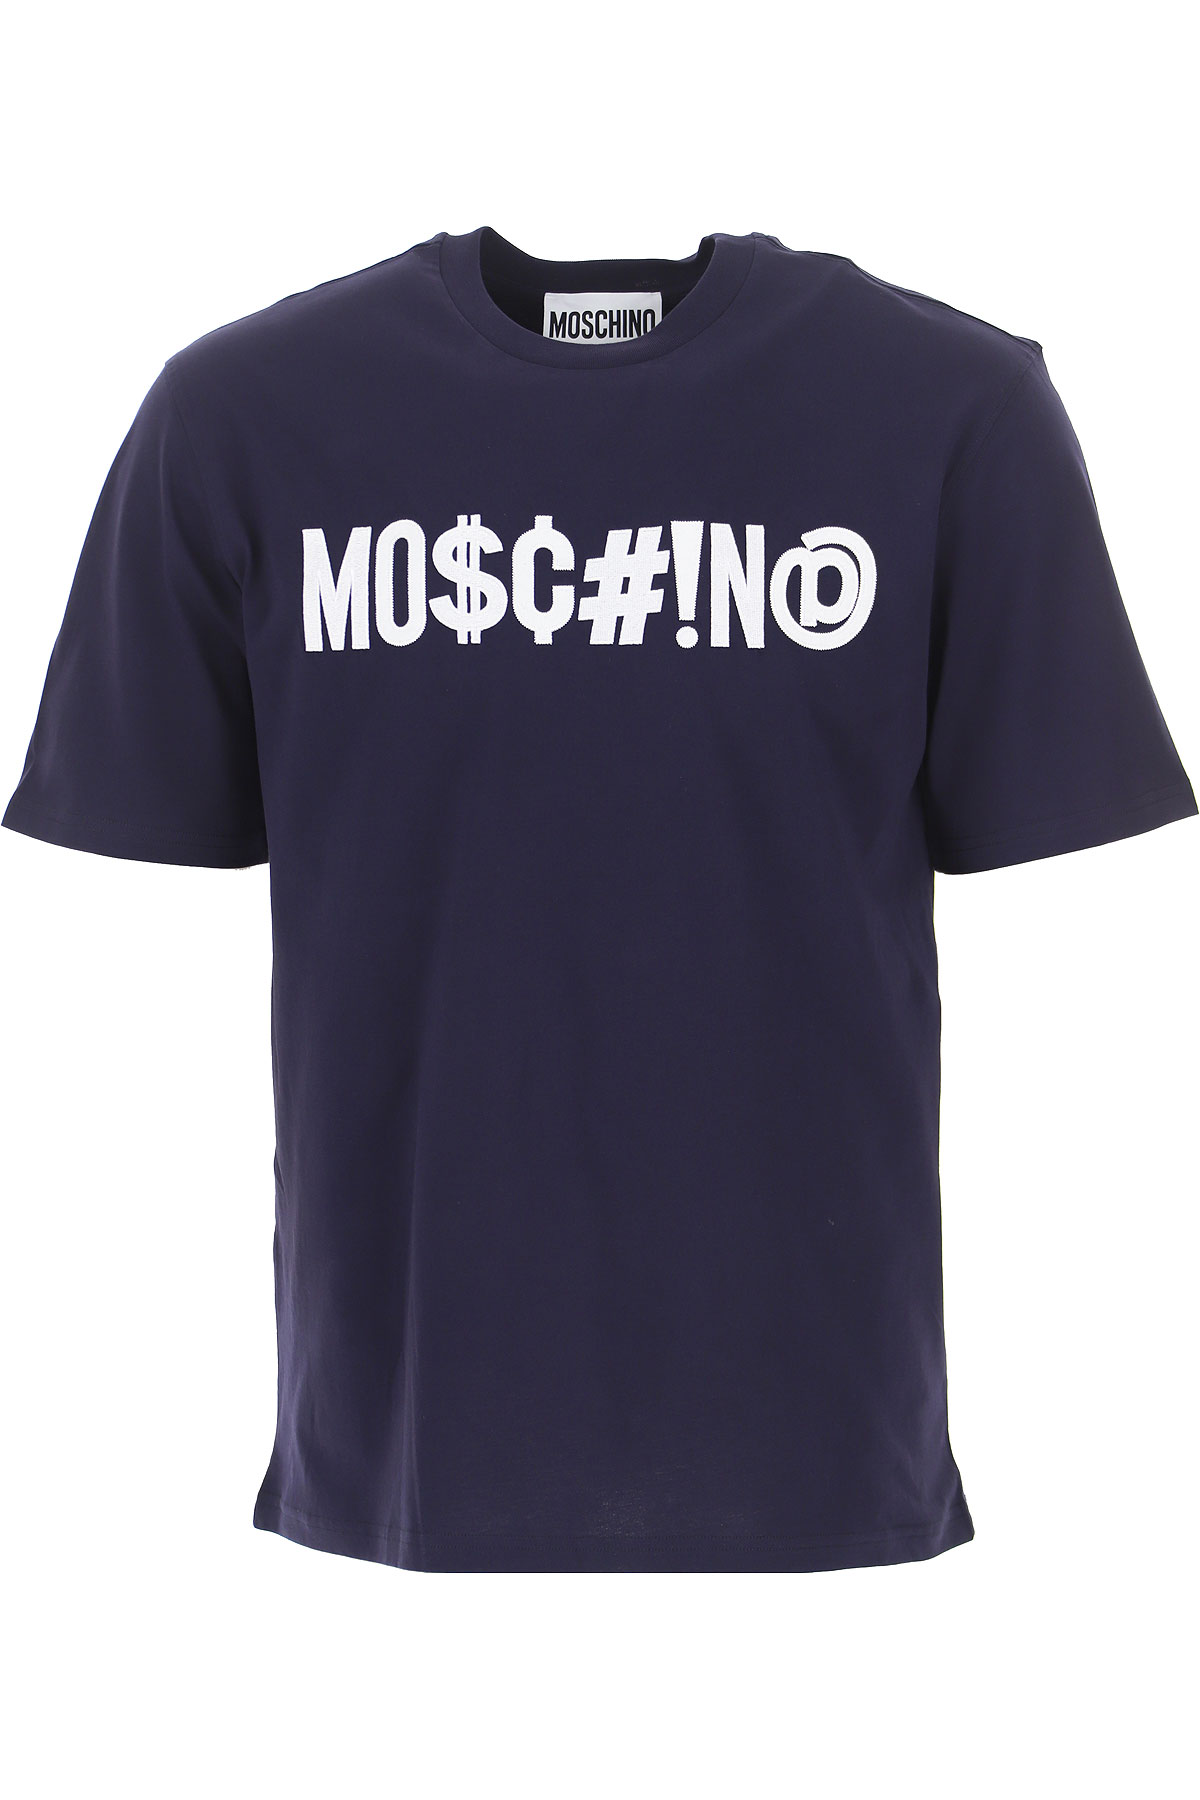 Mens Clothing Moschino, Style code: a07137040-1510-